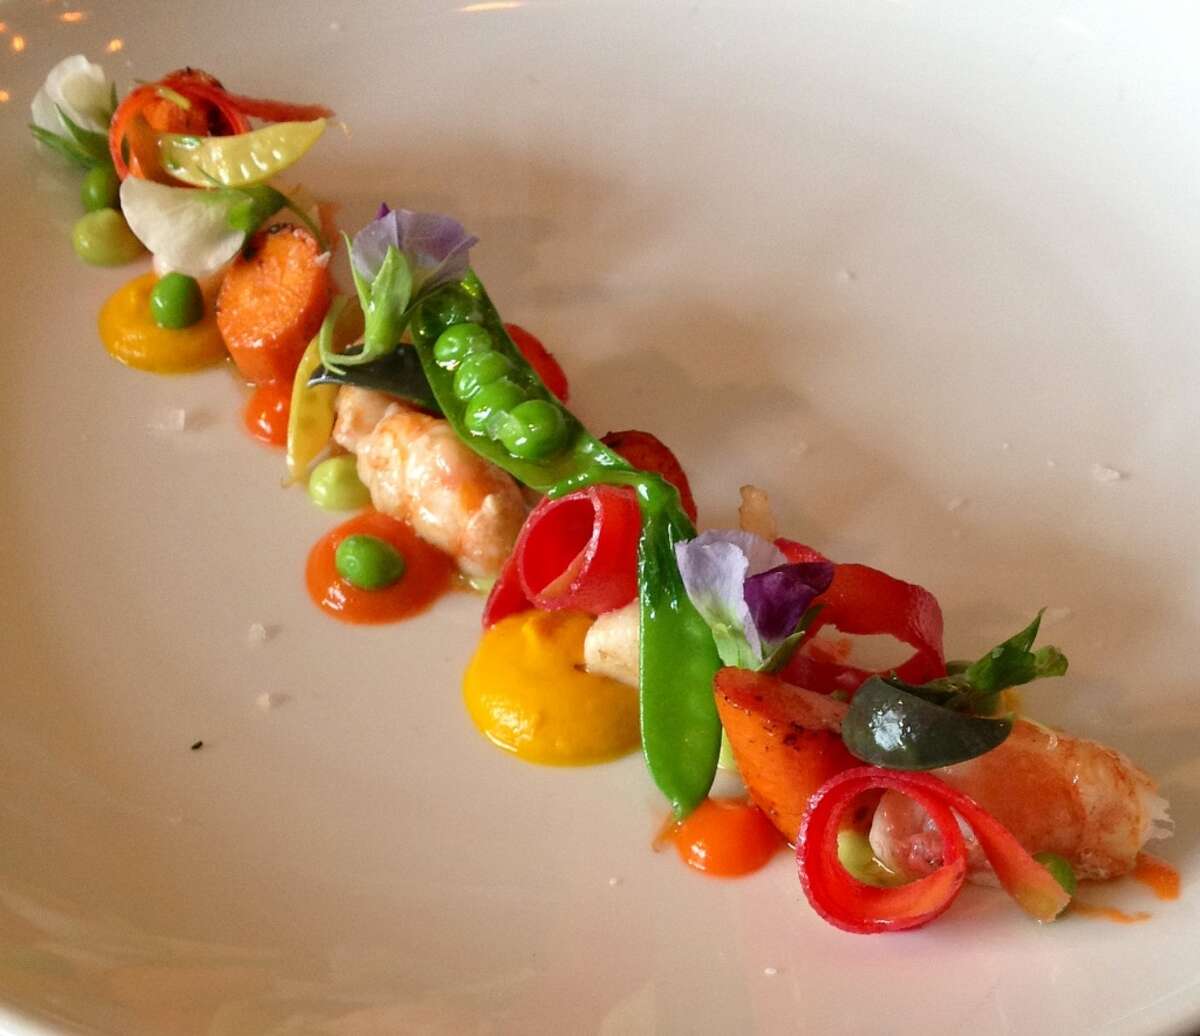 Spot prawns, roasted carrots, snap peas, English peas, pea blossoms and flash pickled black carrots at Uchi Houston.